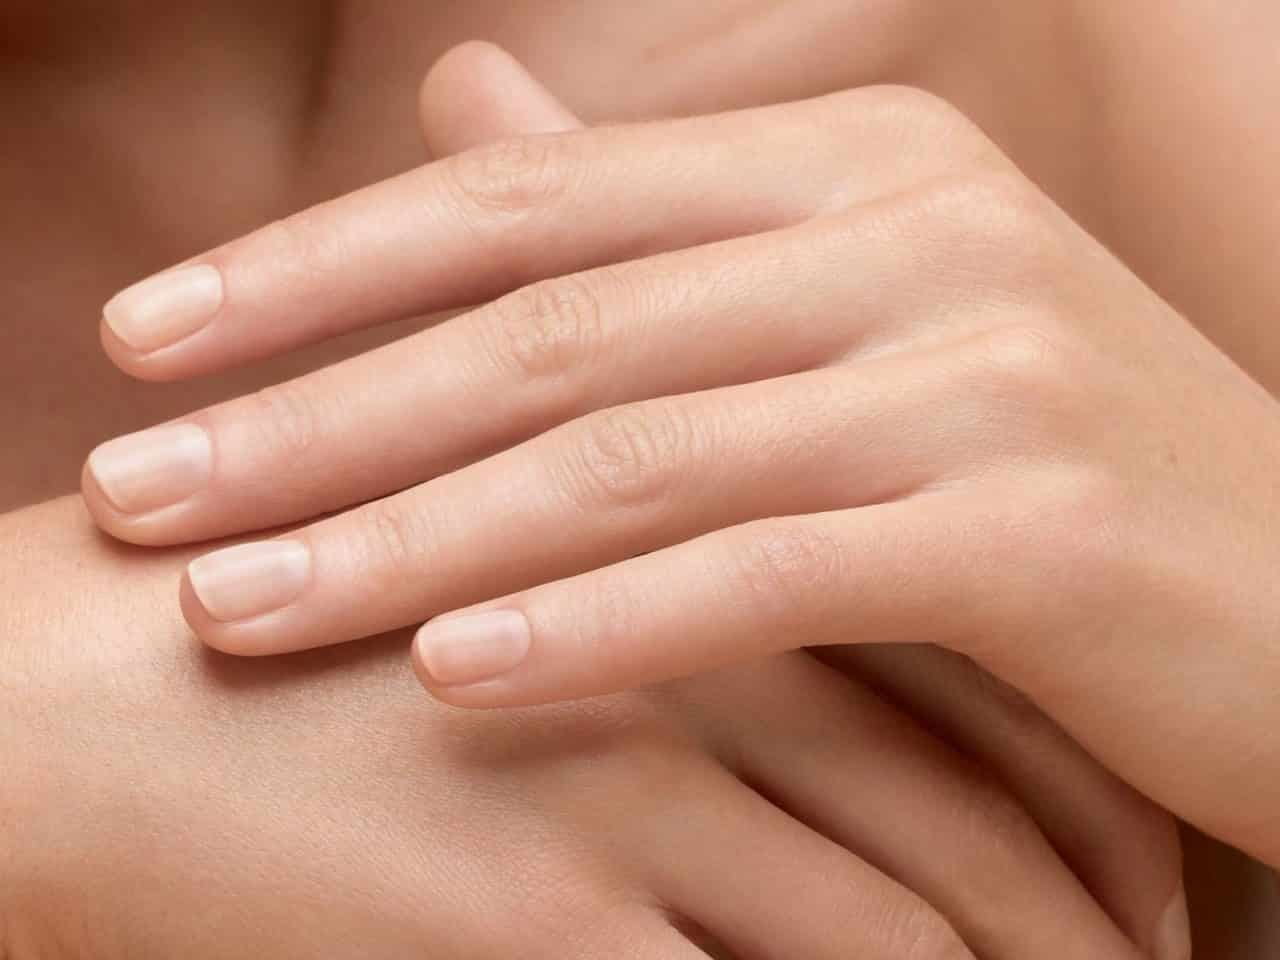 SPOTS ON YOUR NAILS ARE CAUSED BY A LACK OF CALCIUM